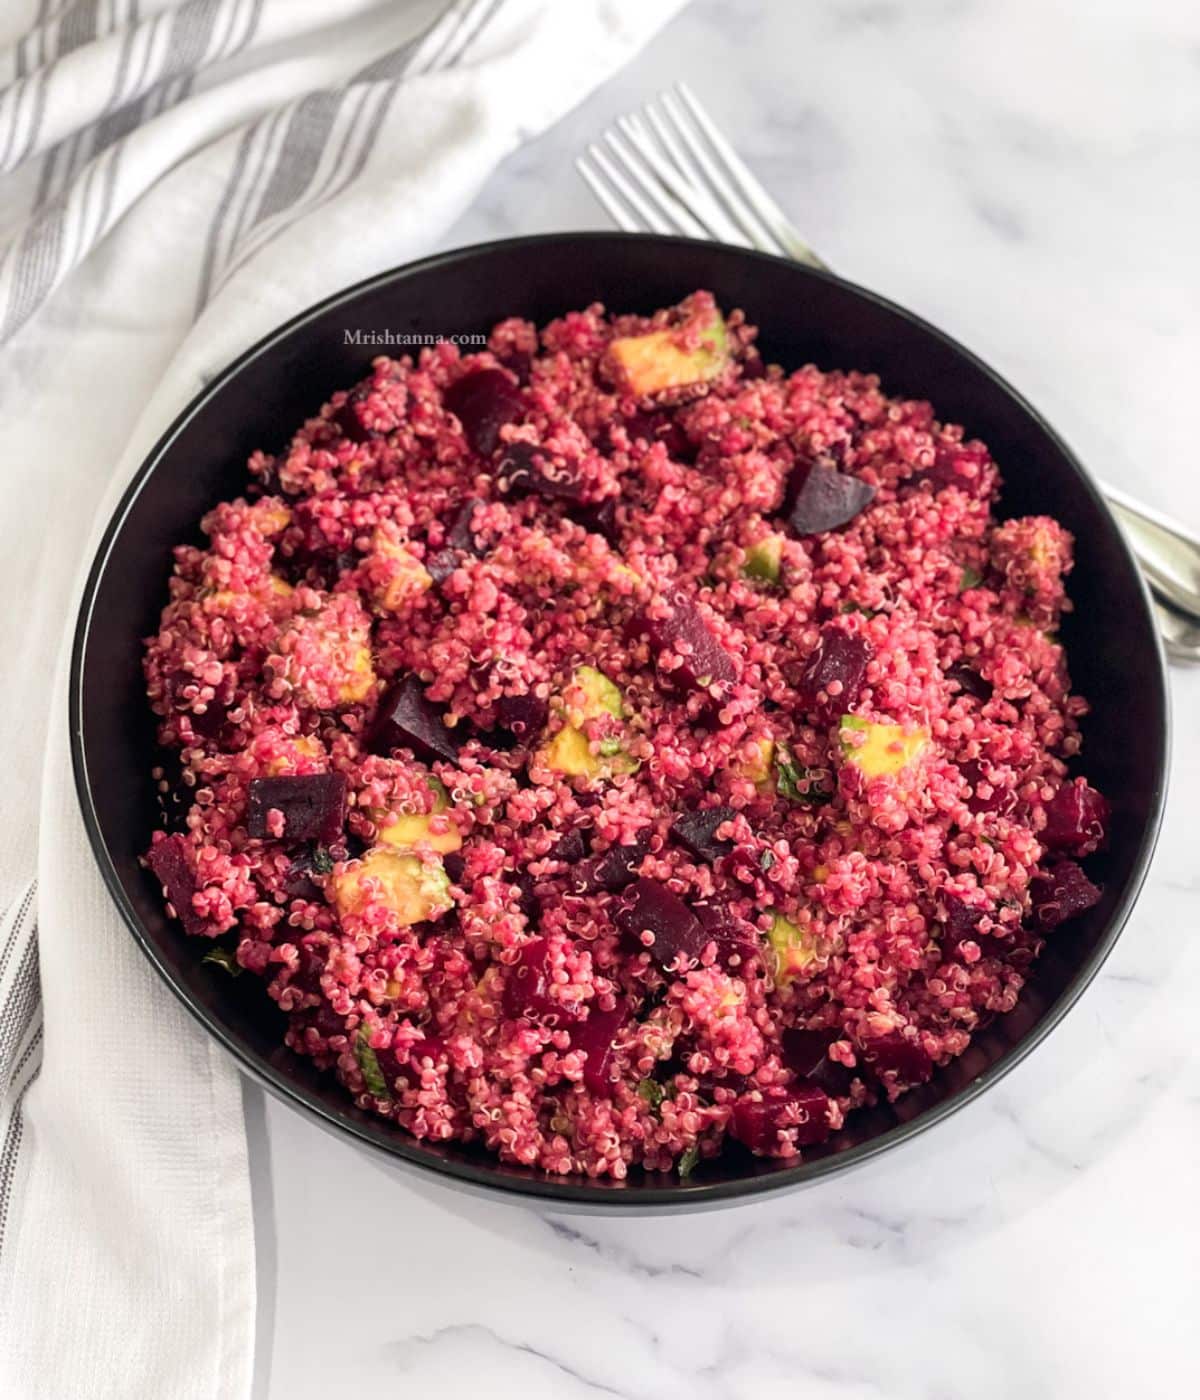 A plate of quinoa salad with beets is on the table with a fork on the side.